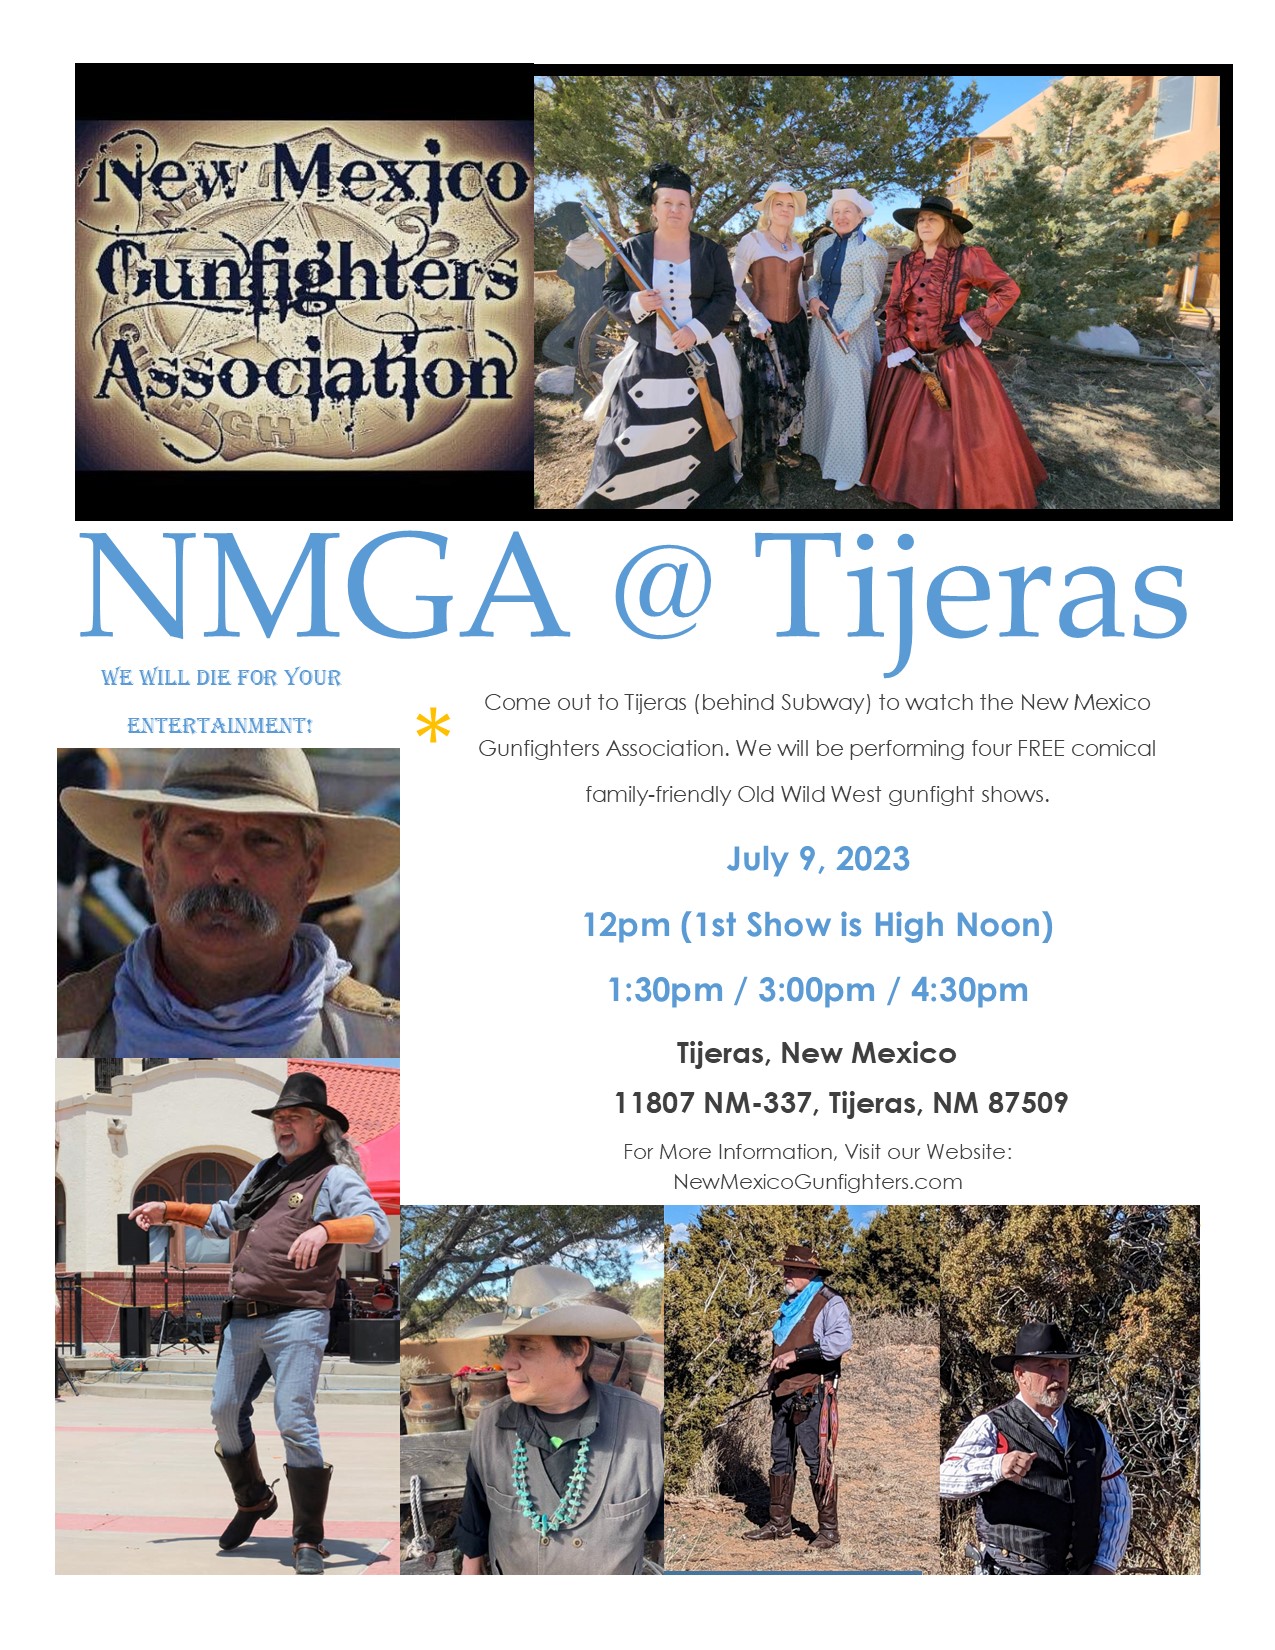 July 9 the Gunfighters will be in Tijeras, New Mexico. 